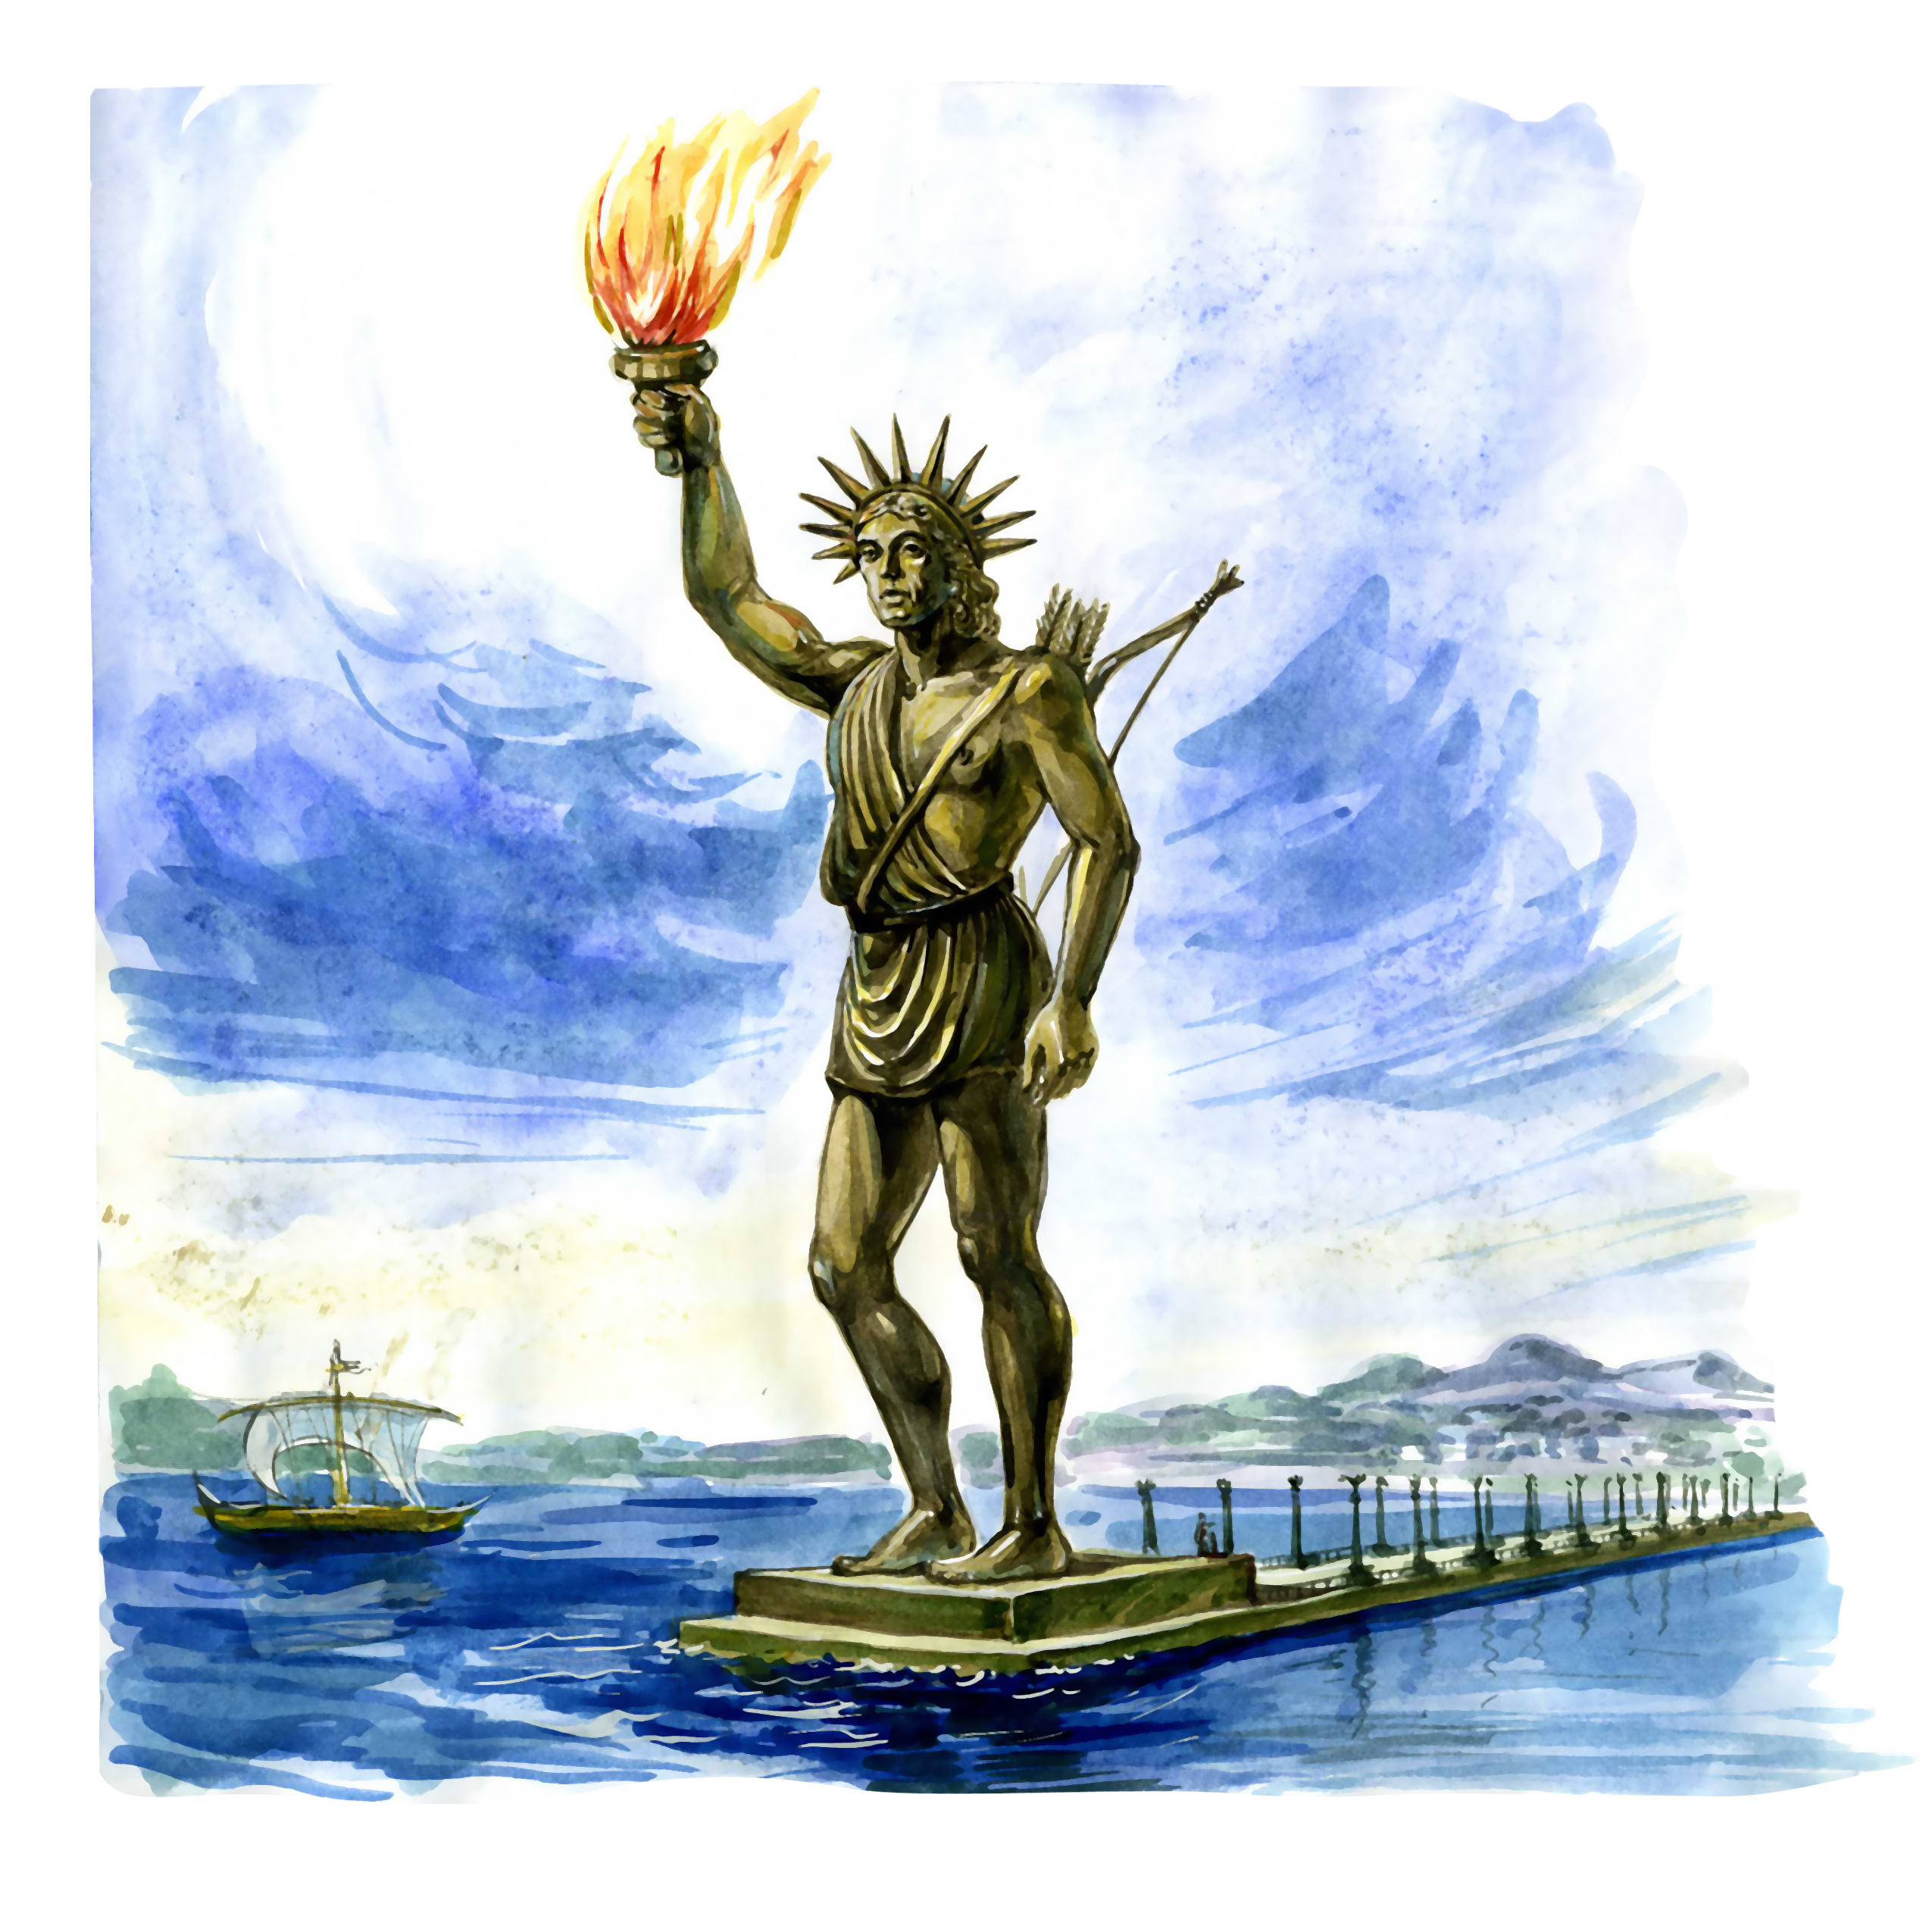 colossus of rhodes location